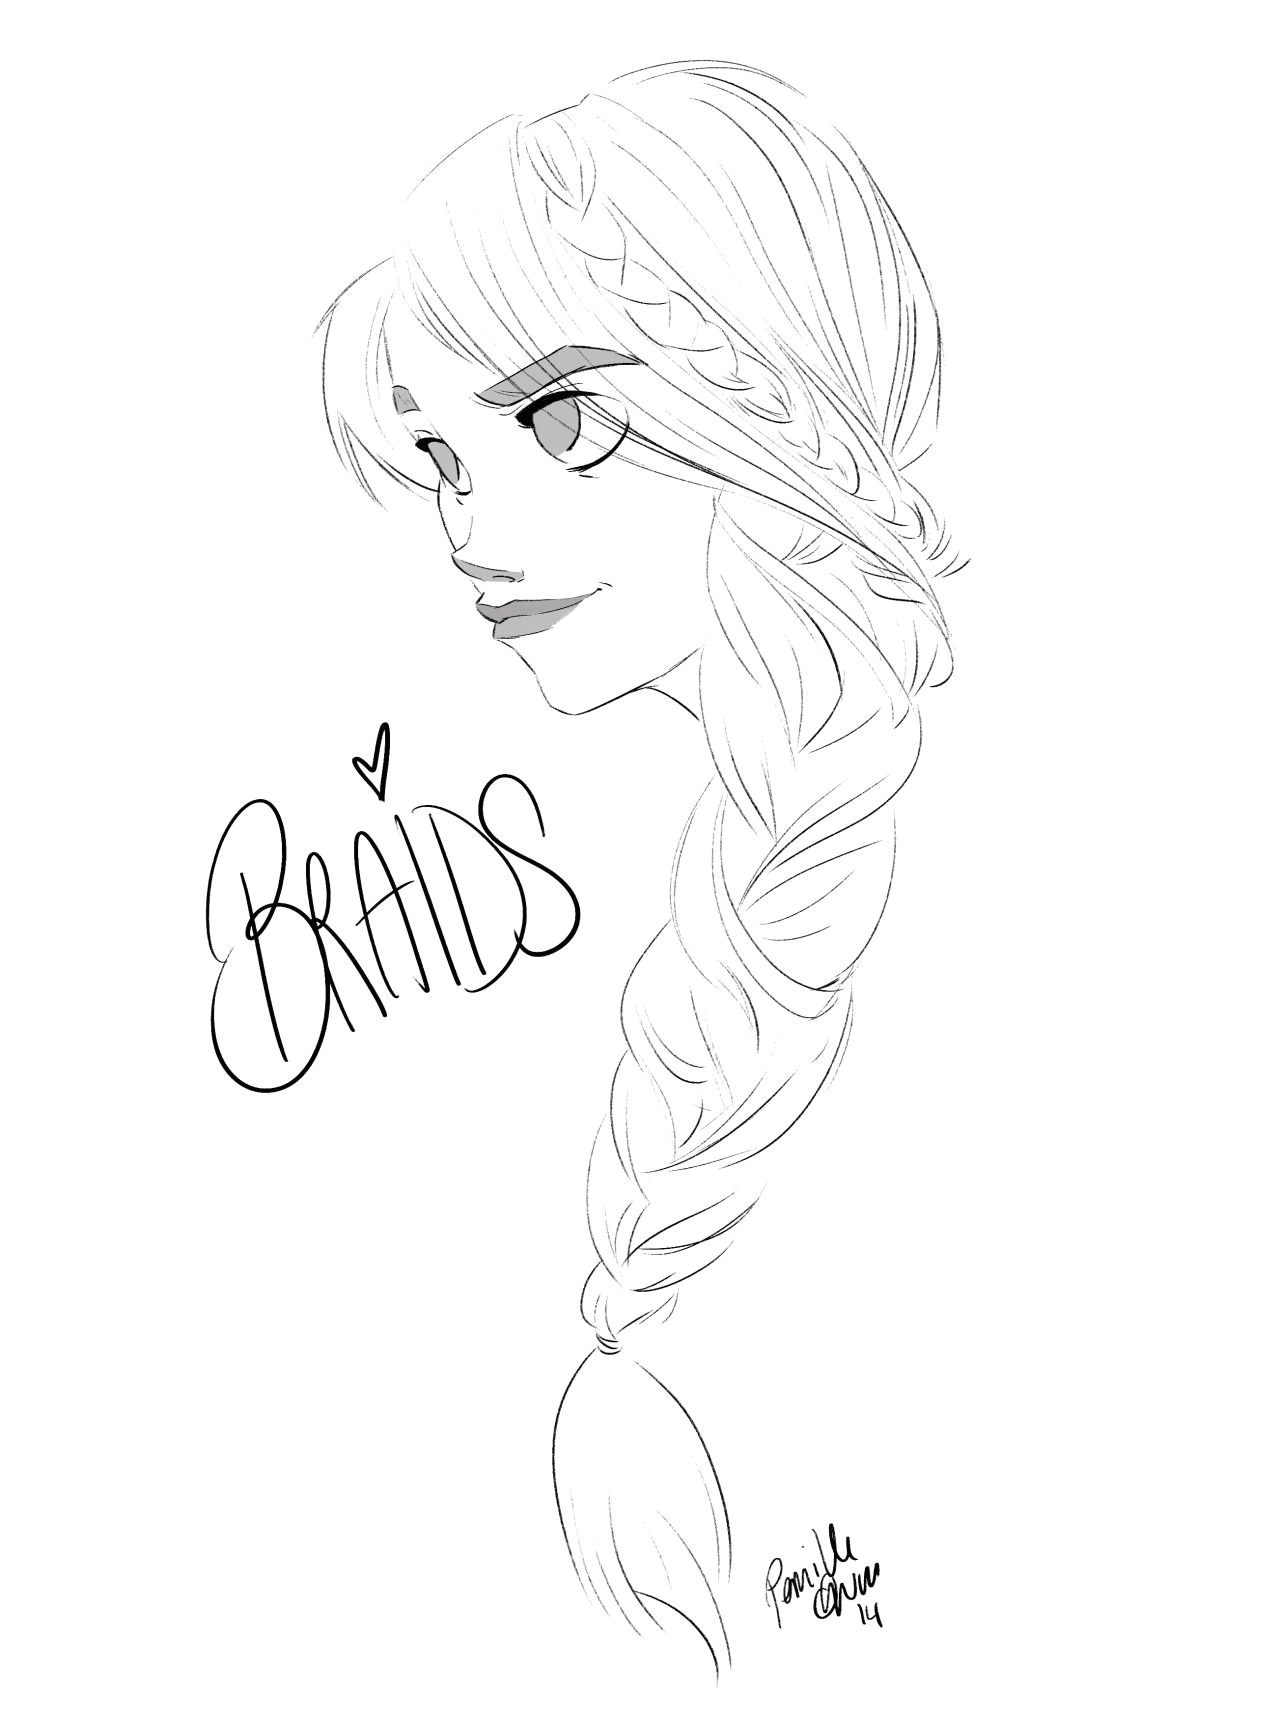 Drawing Warm Up Ideas today S Warmup I Have A Thing for Braids at the Moment Art by